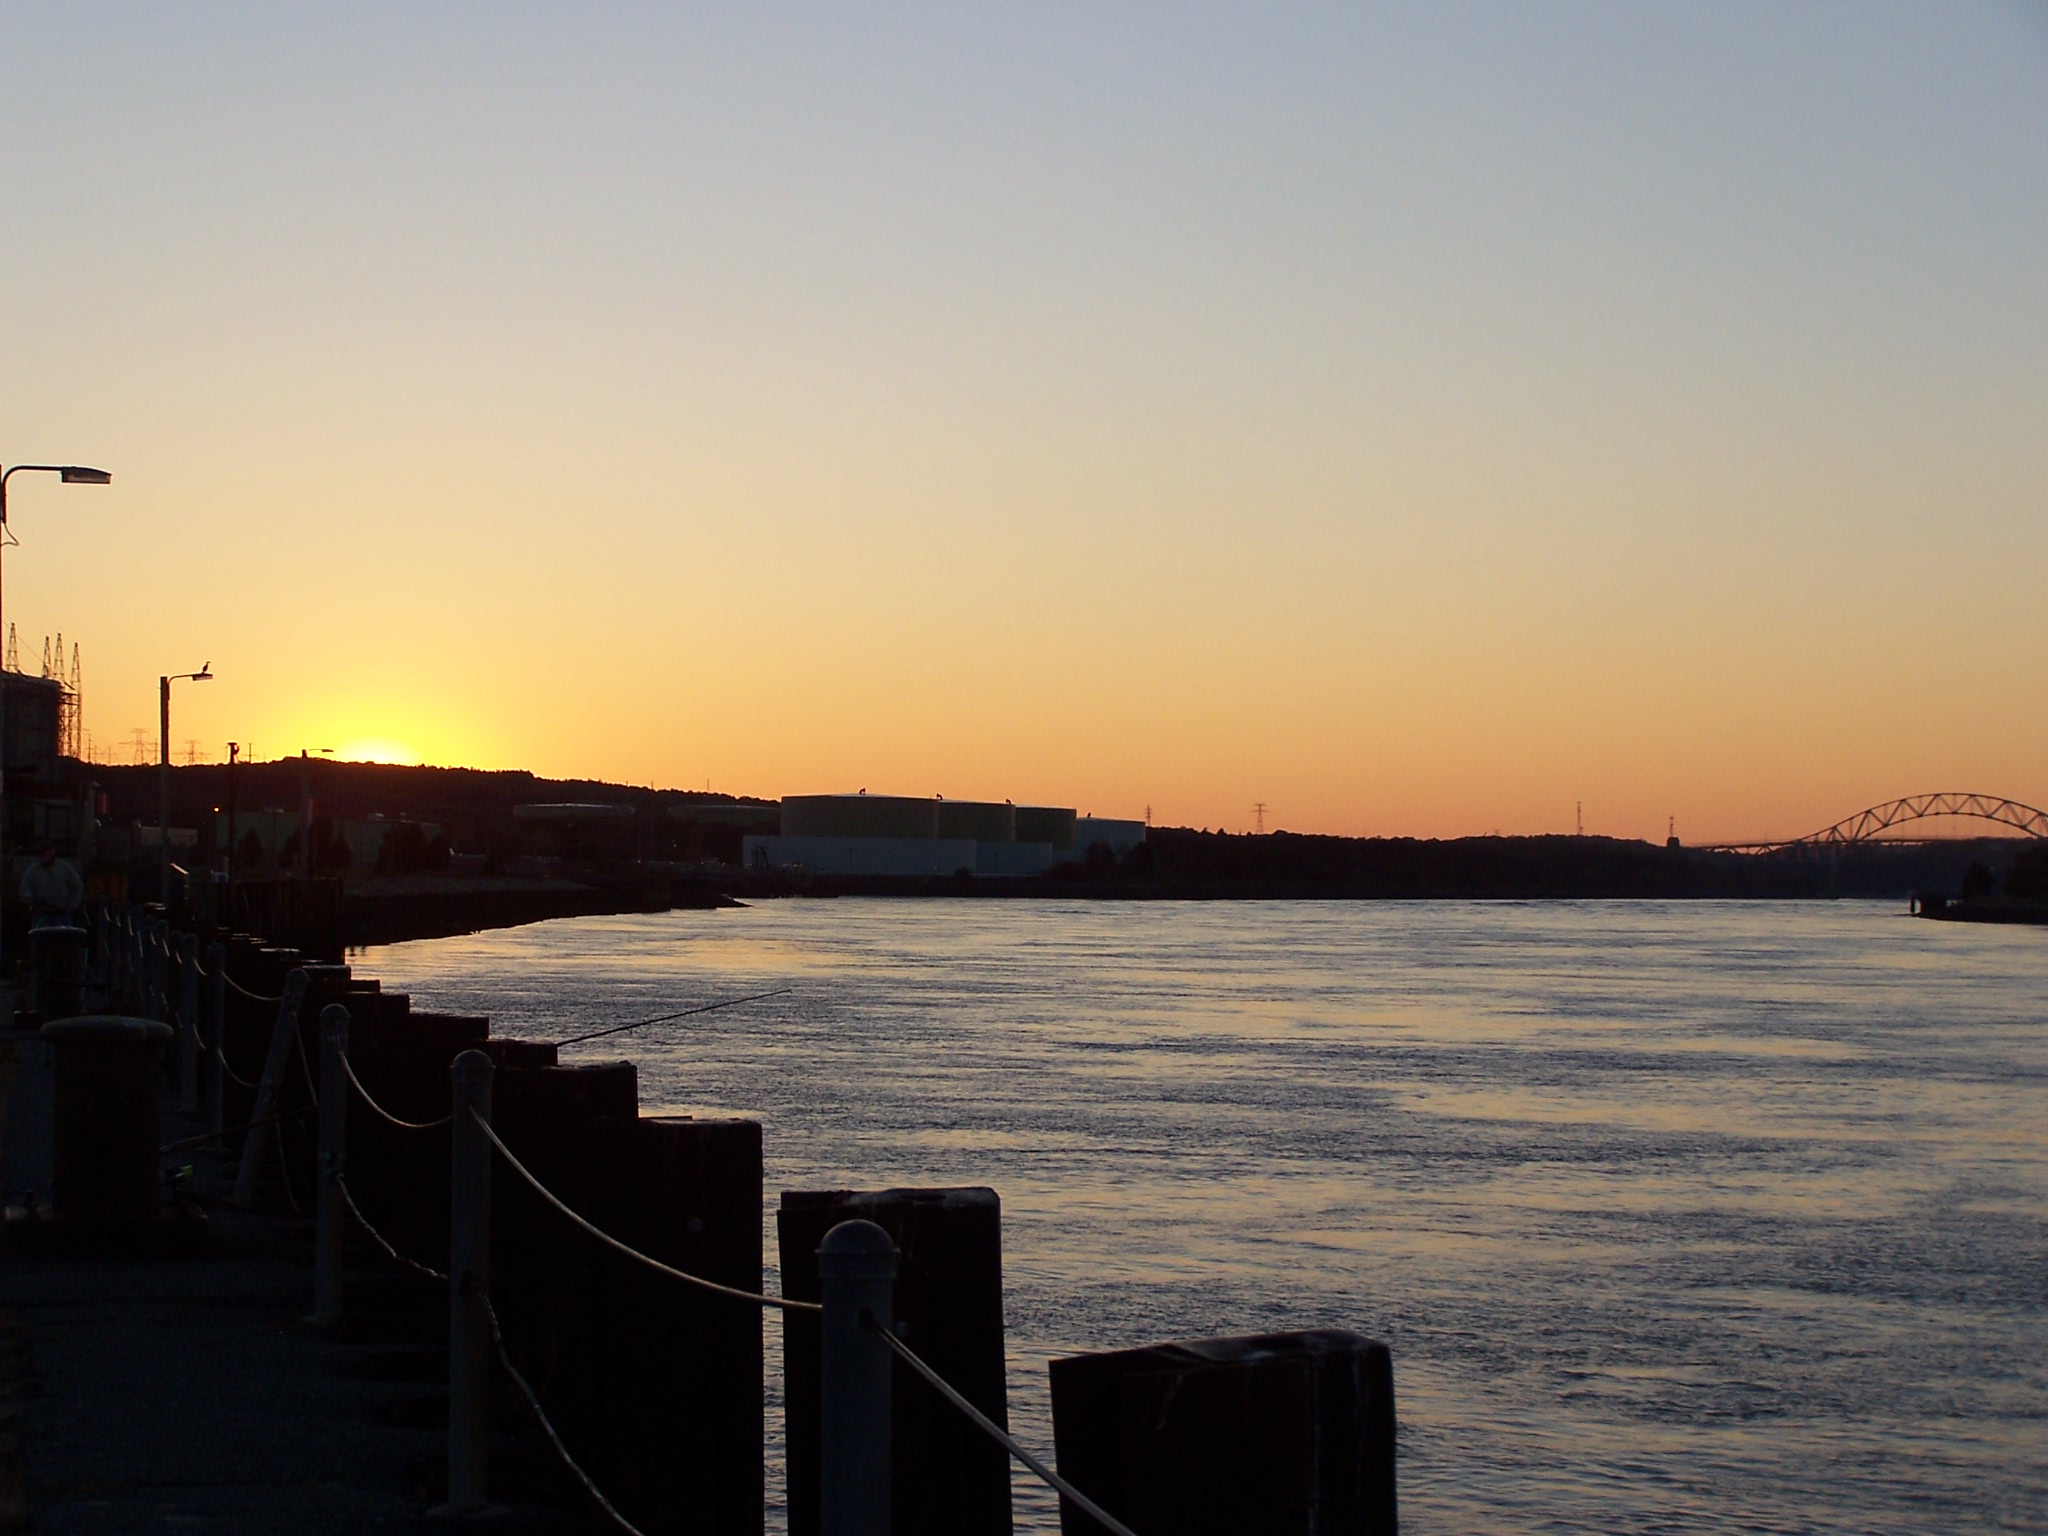 Cape Cod Sunset by the Bridge (user submitted)